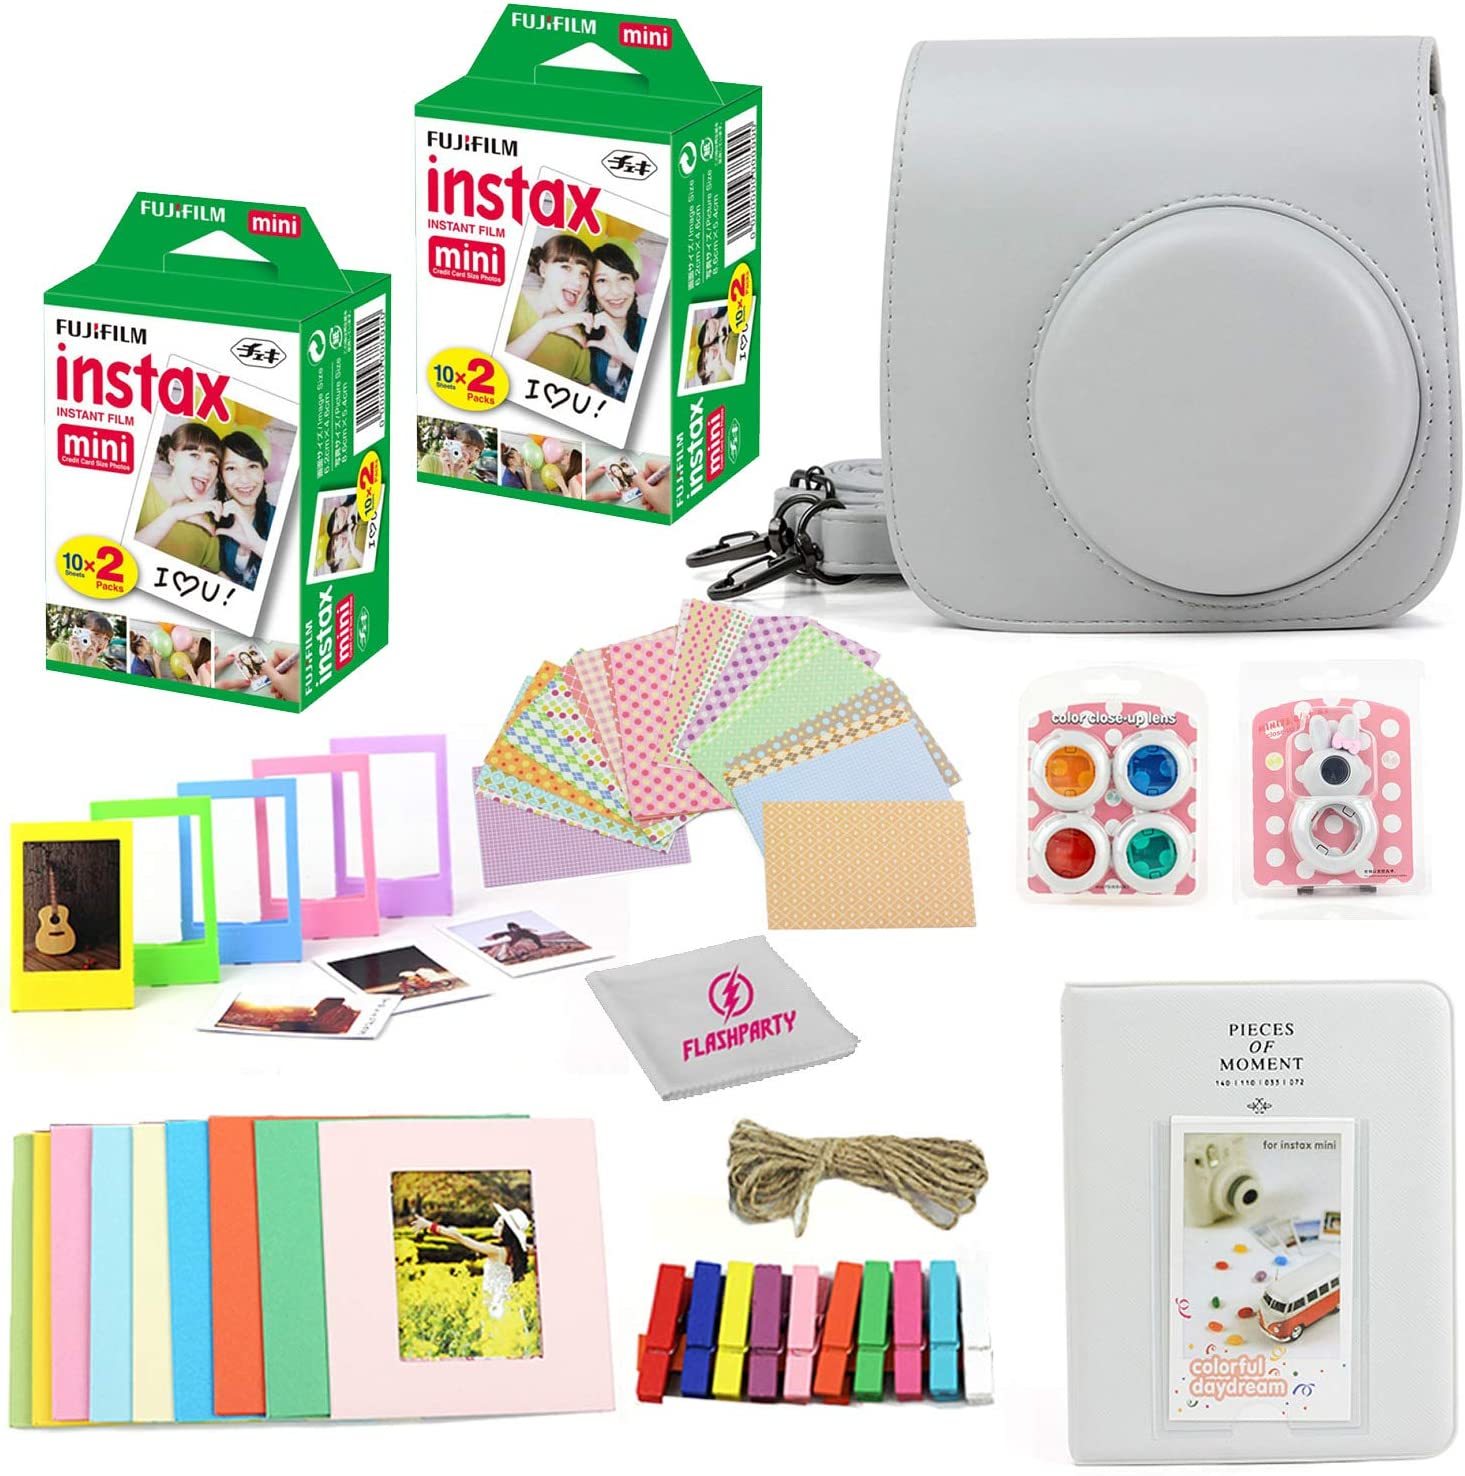 Two Twin Packs Of Fuji Instax Mini Instant Film (40 Sheets Each), A Protective - $64.92